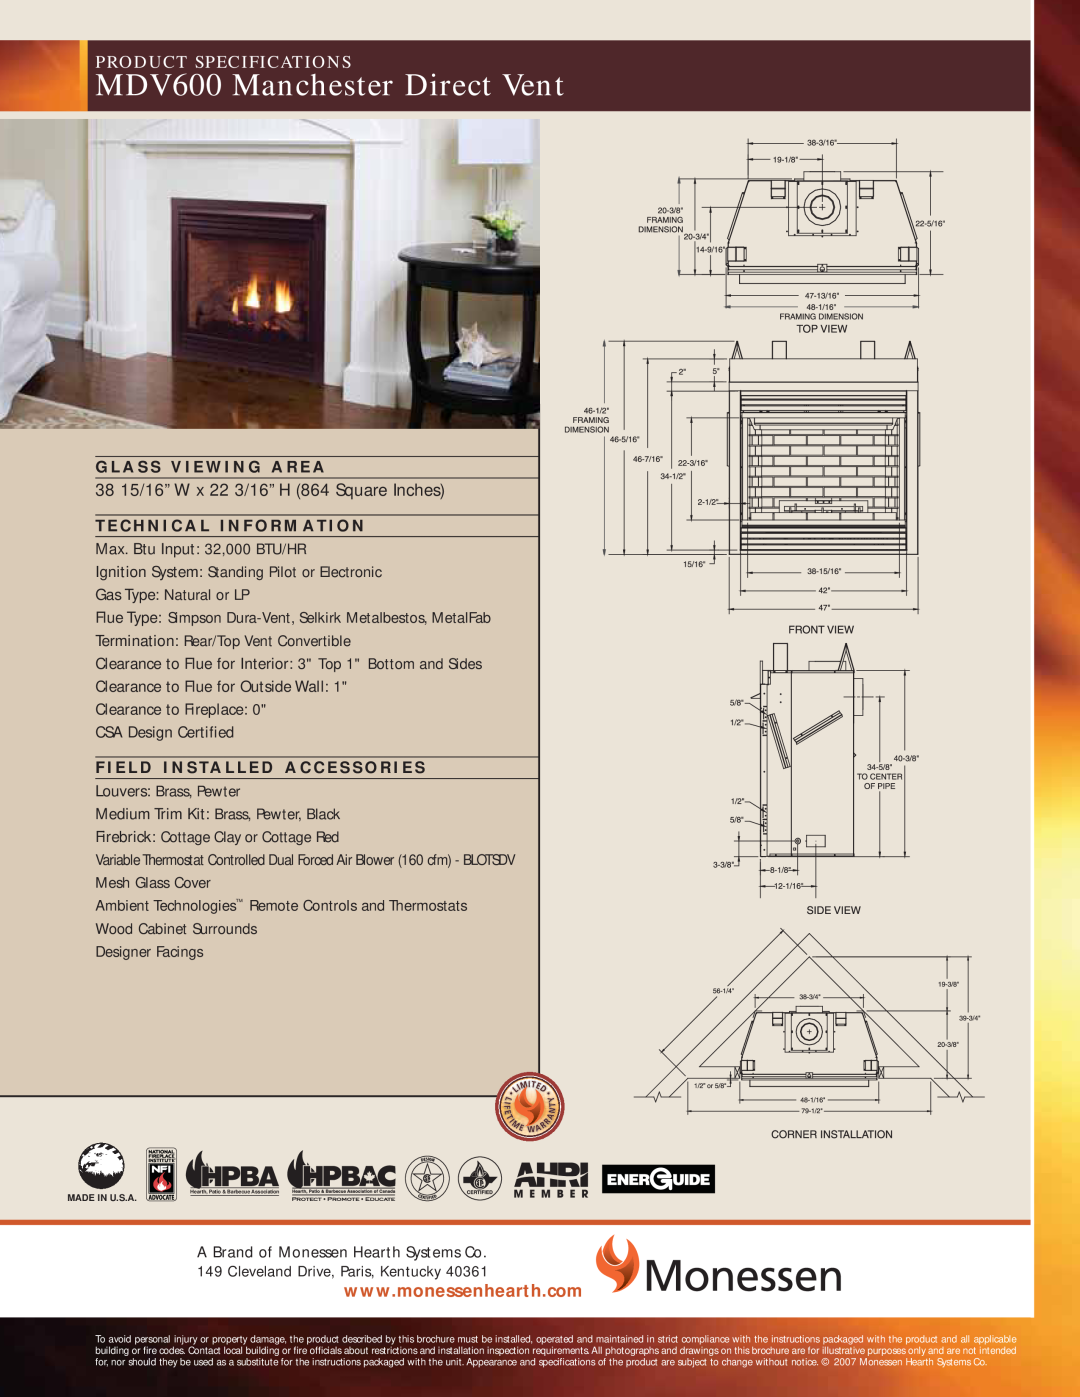 Monessen Hearth specifications MDV600 Manchester Direct Vent, Product Specifications 